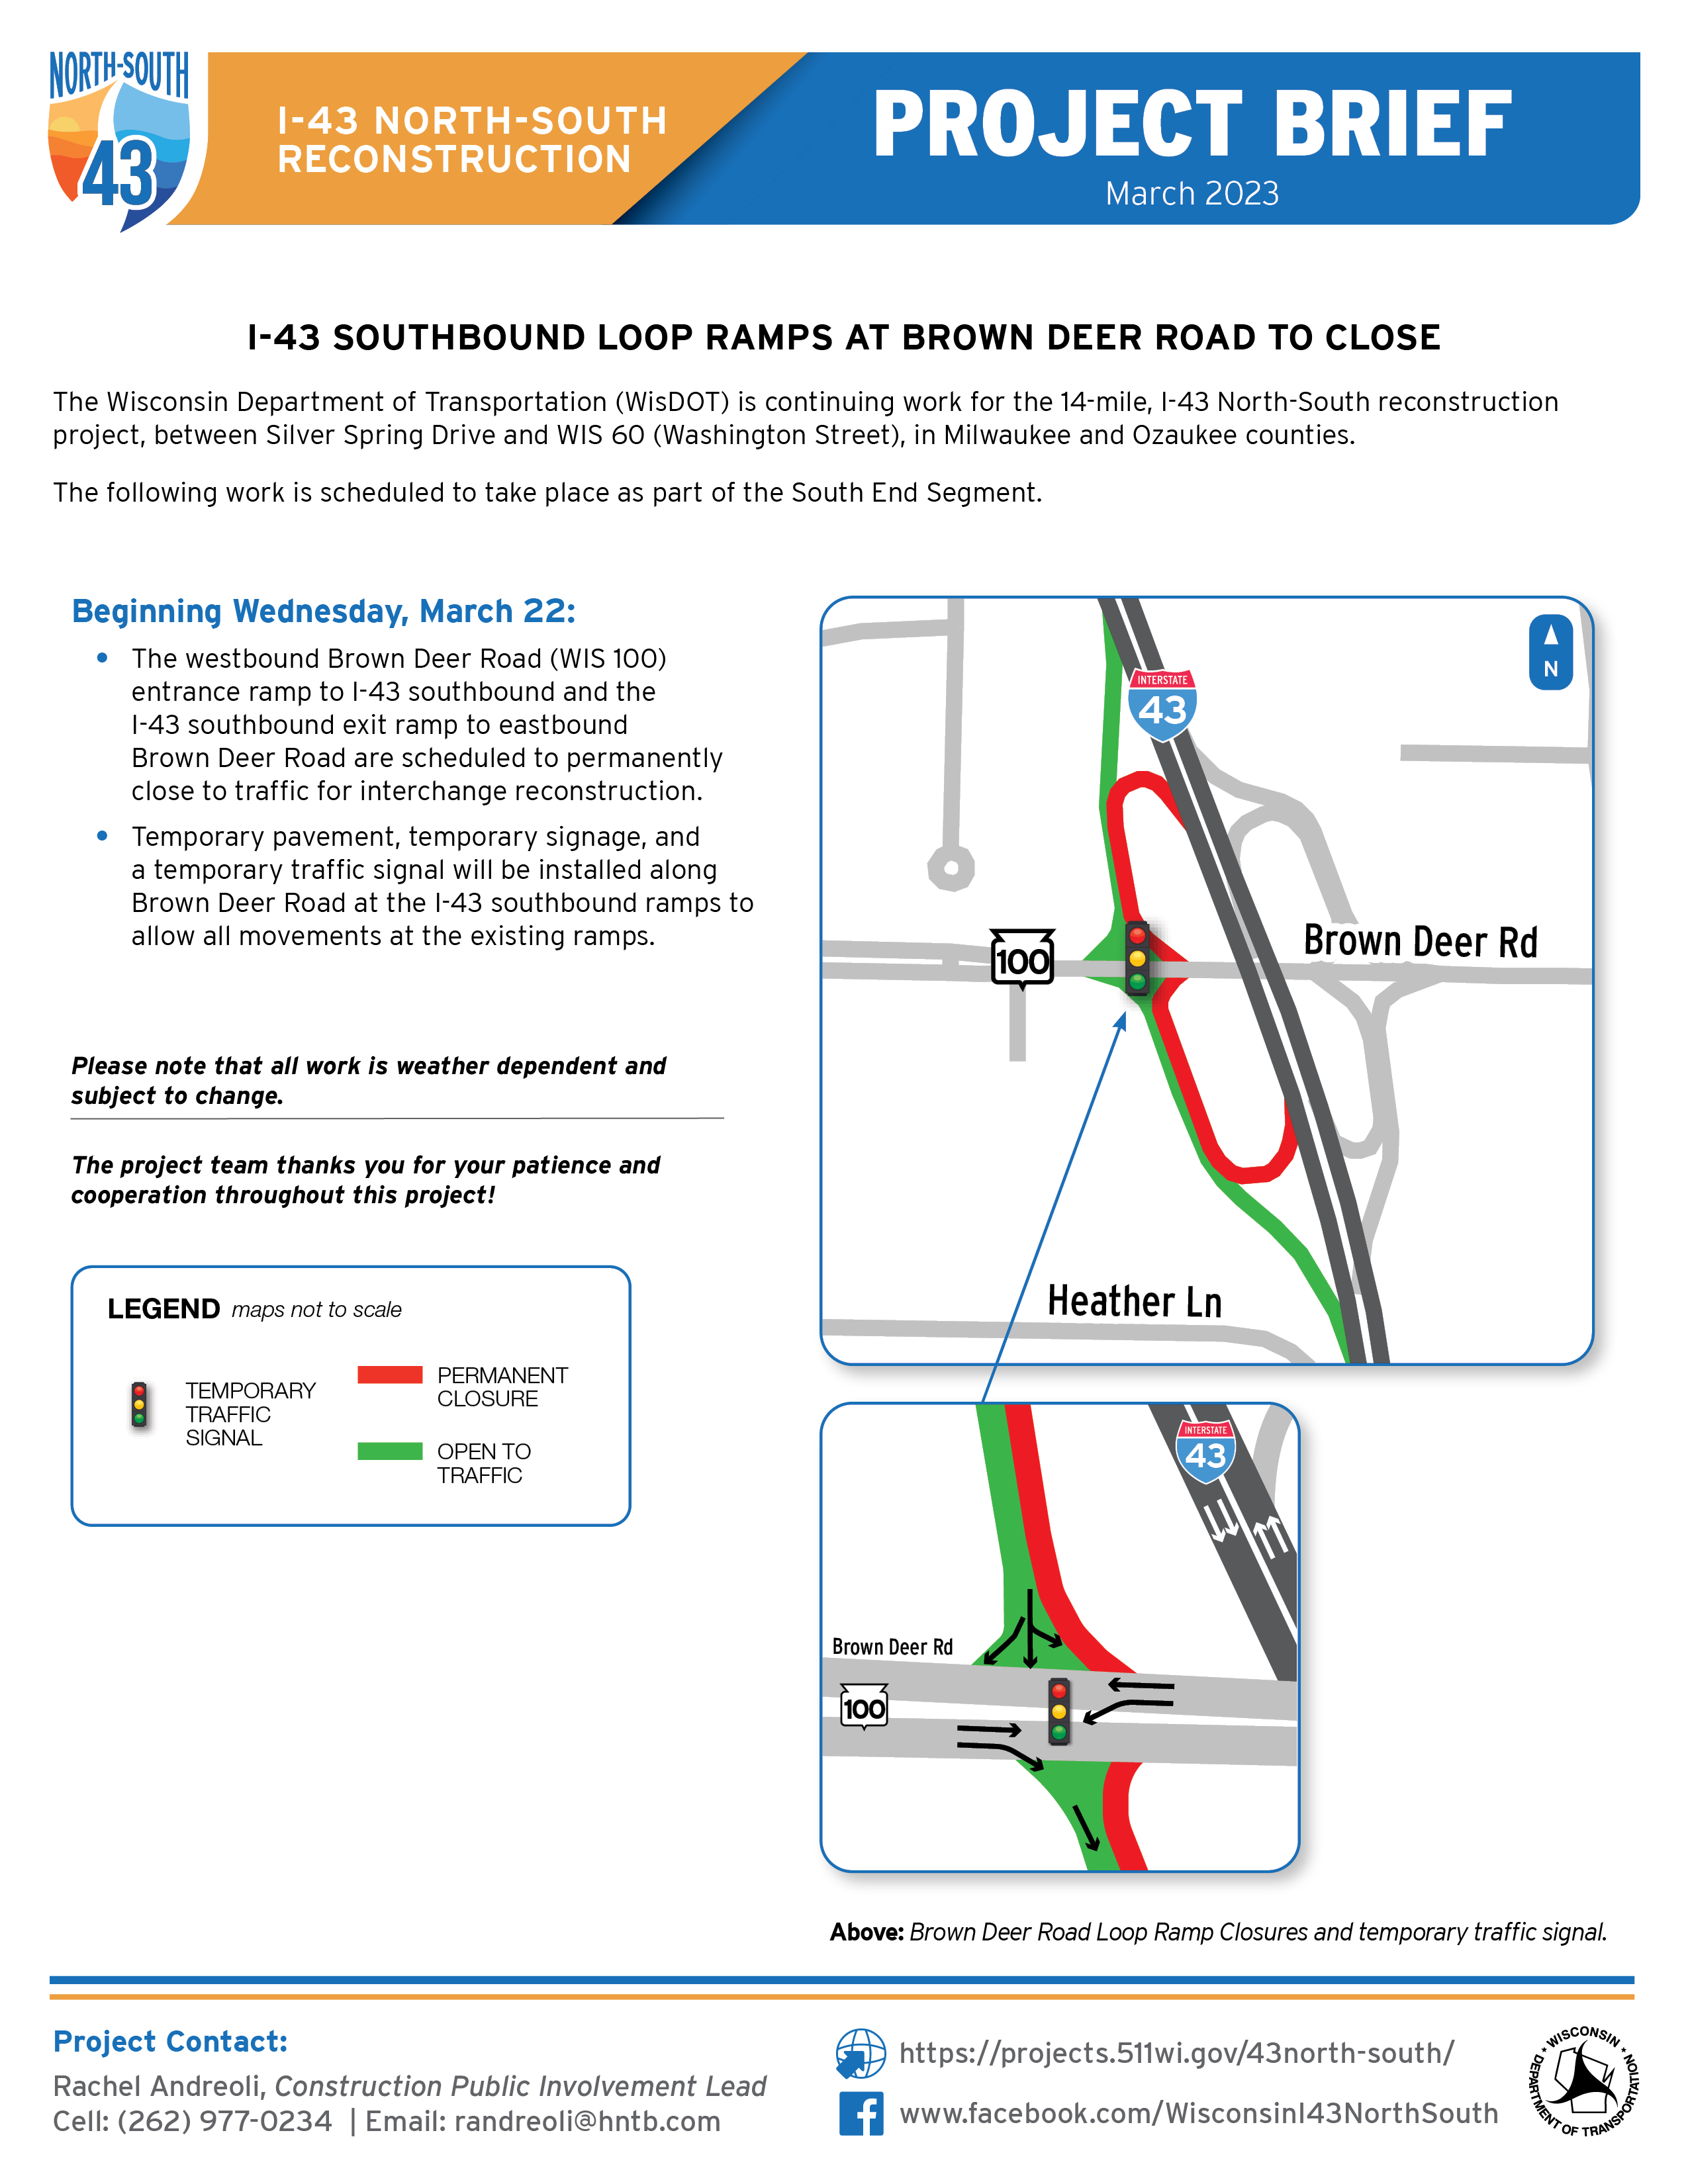 March 22, I-43 Southbound Loop Ramps at Brown Deer Road to Close